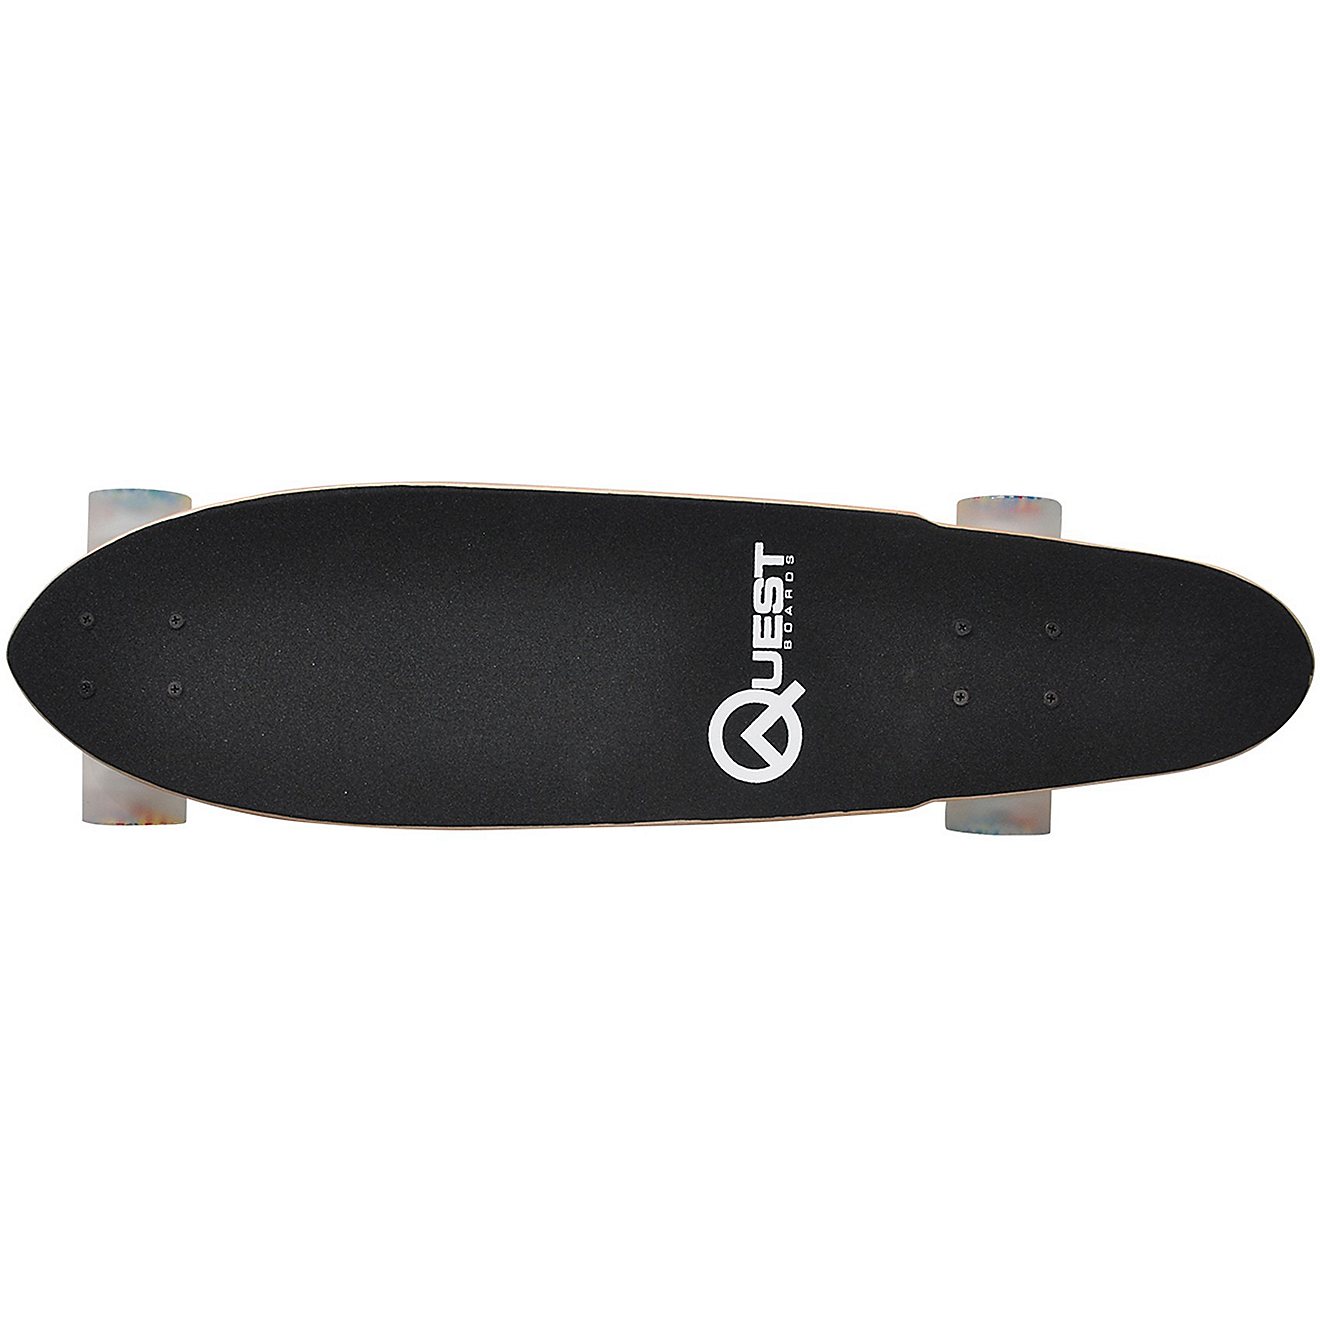 Quest Trippy 30 in Cruiser Longboard                                                                                             - view number 2